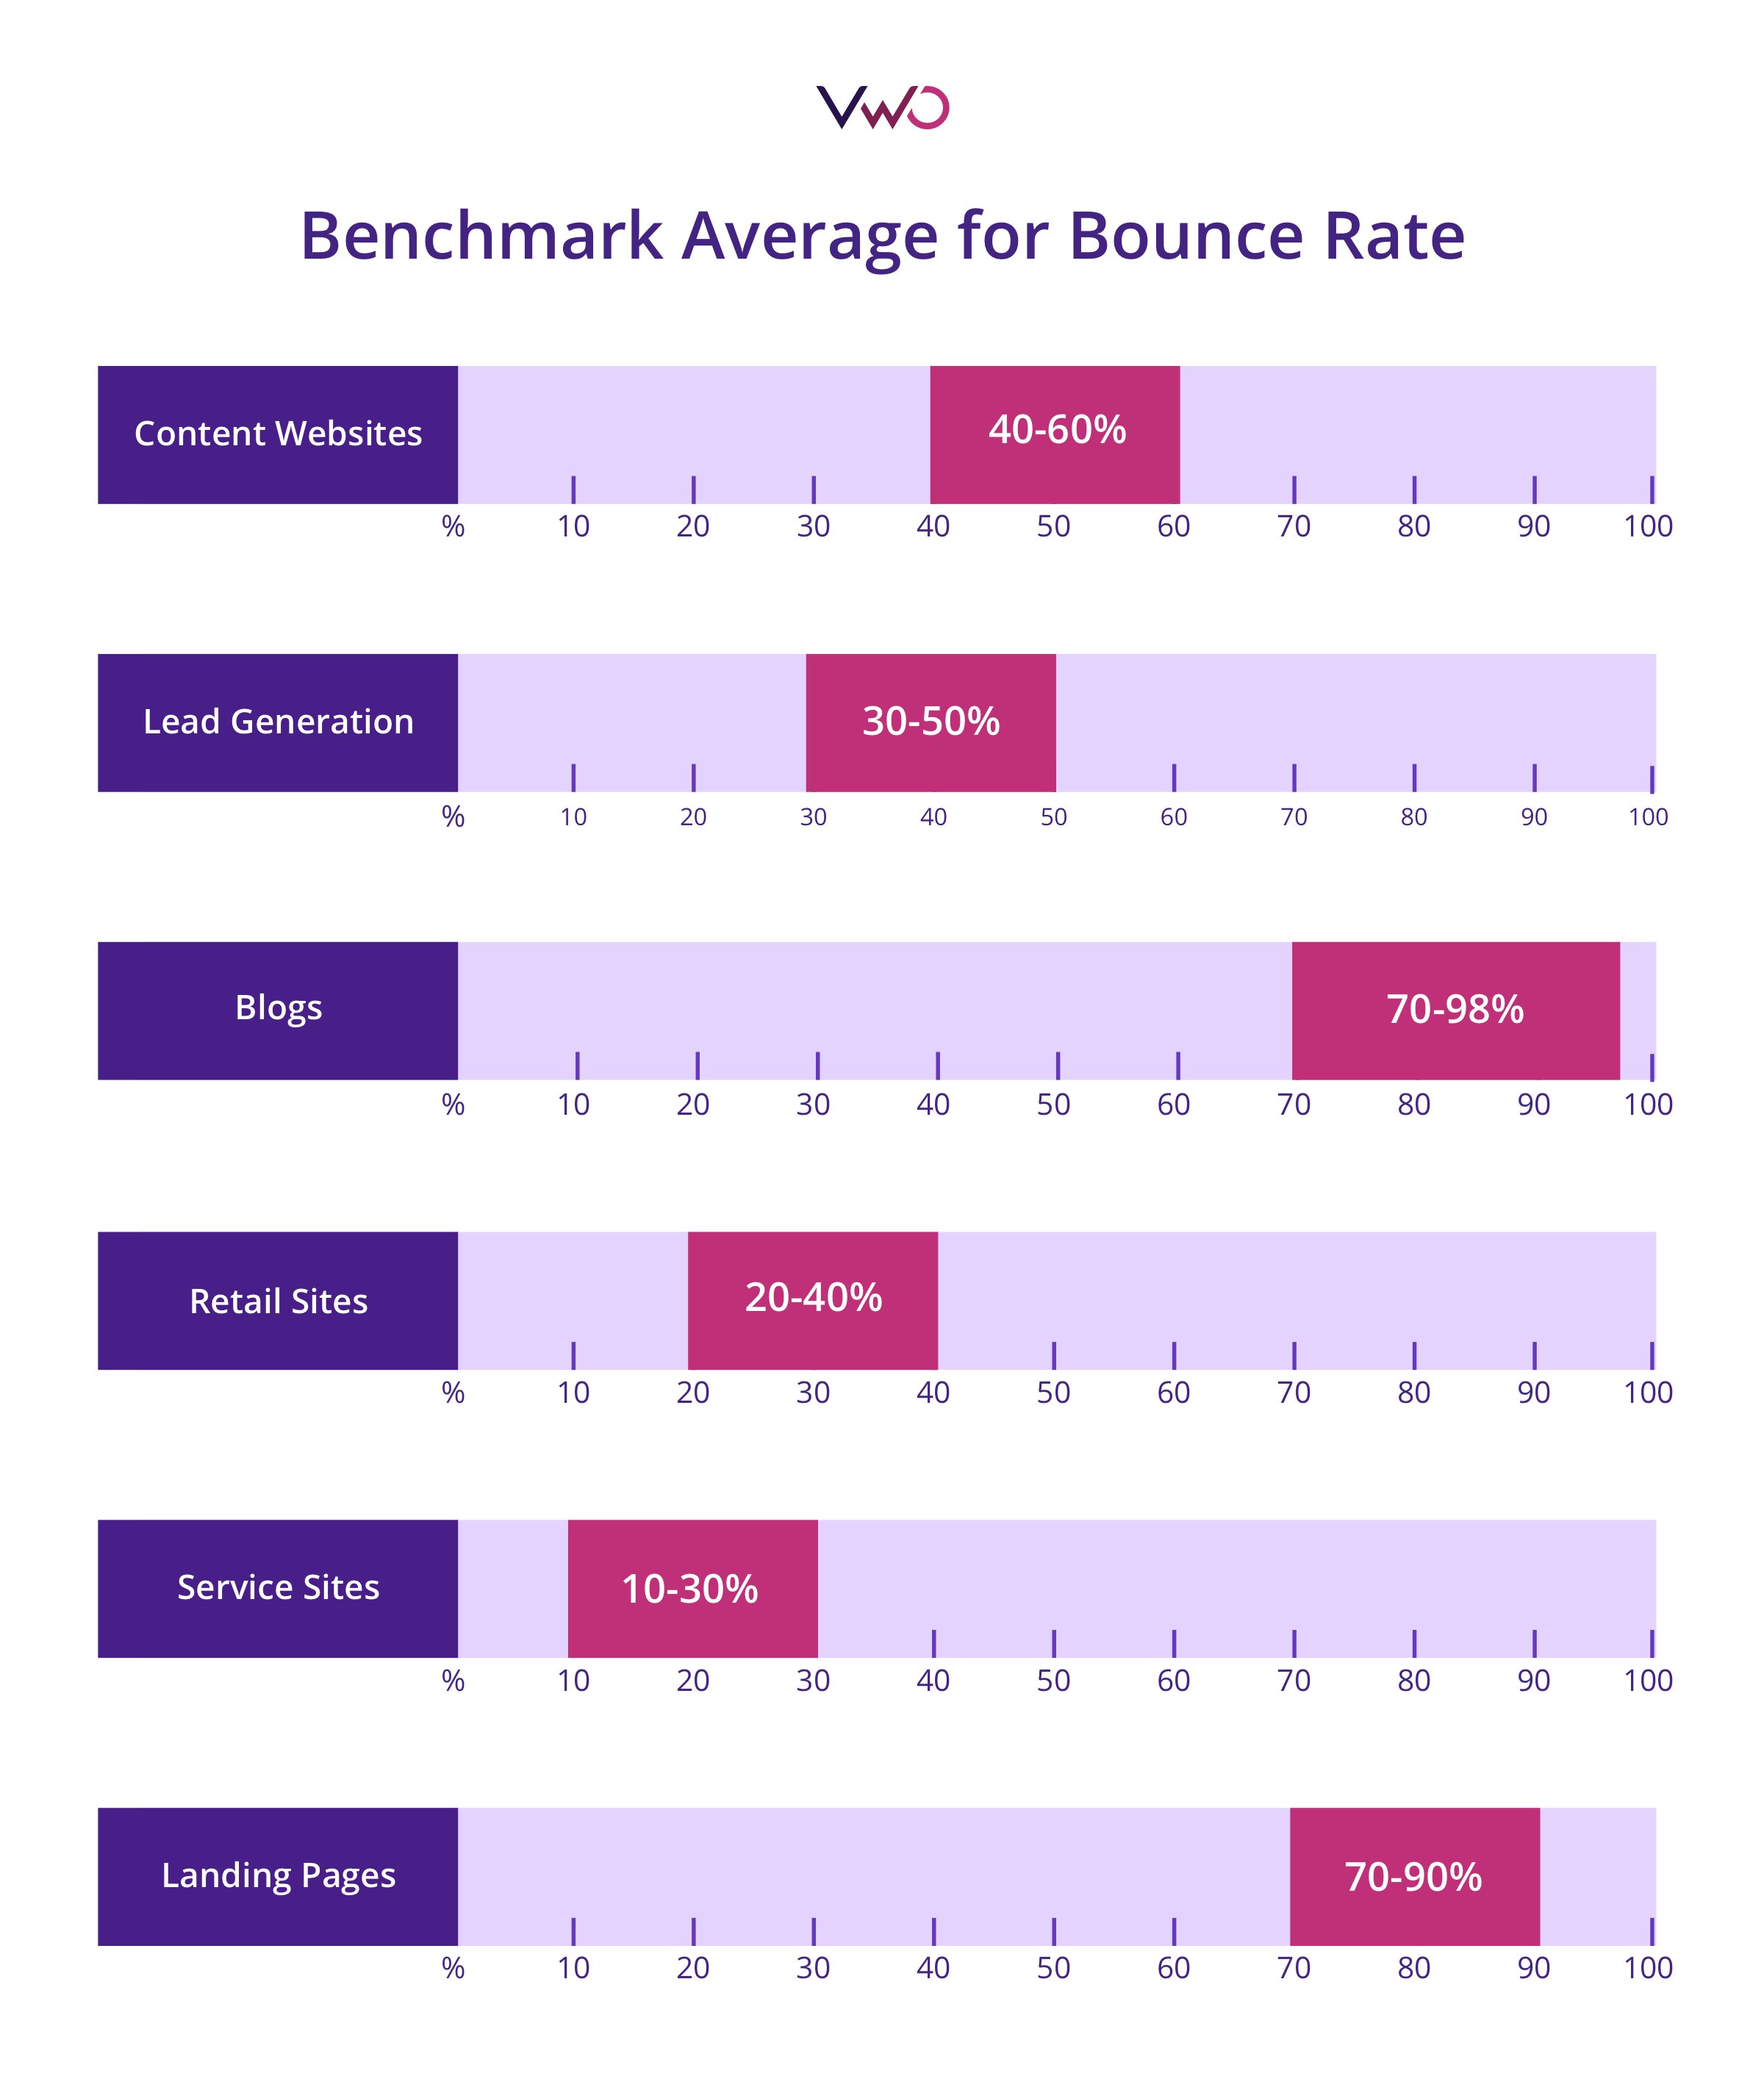 Benchmark Average For Bounce Rate